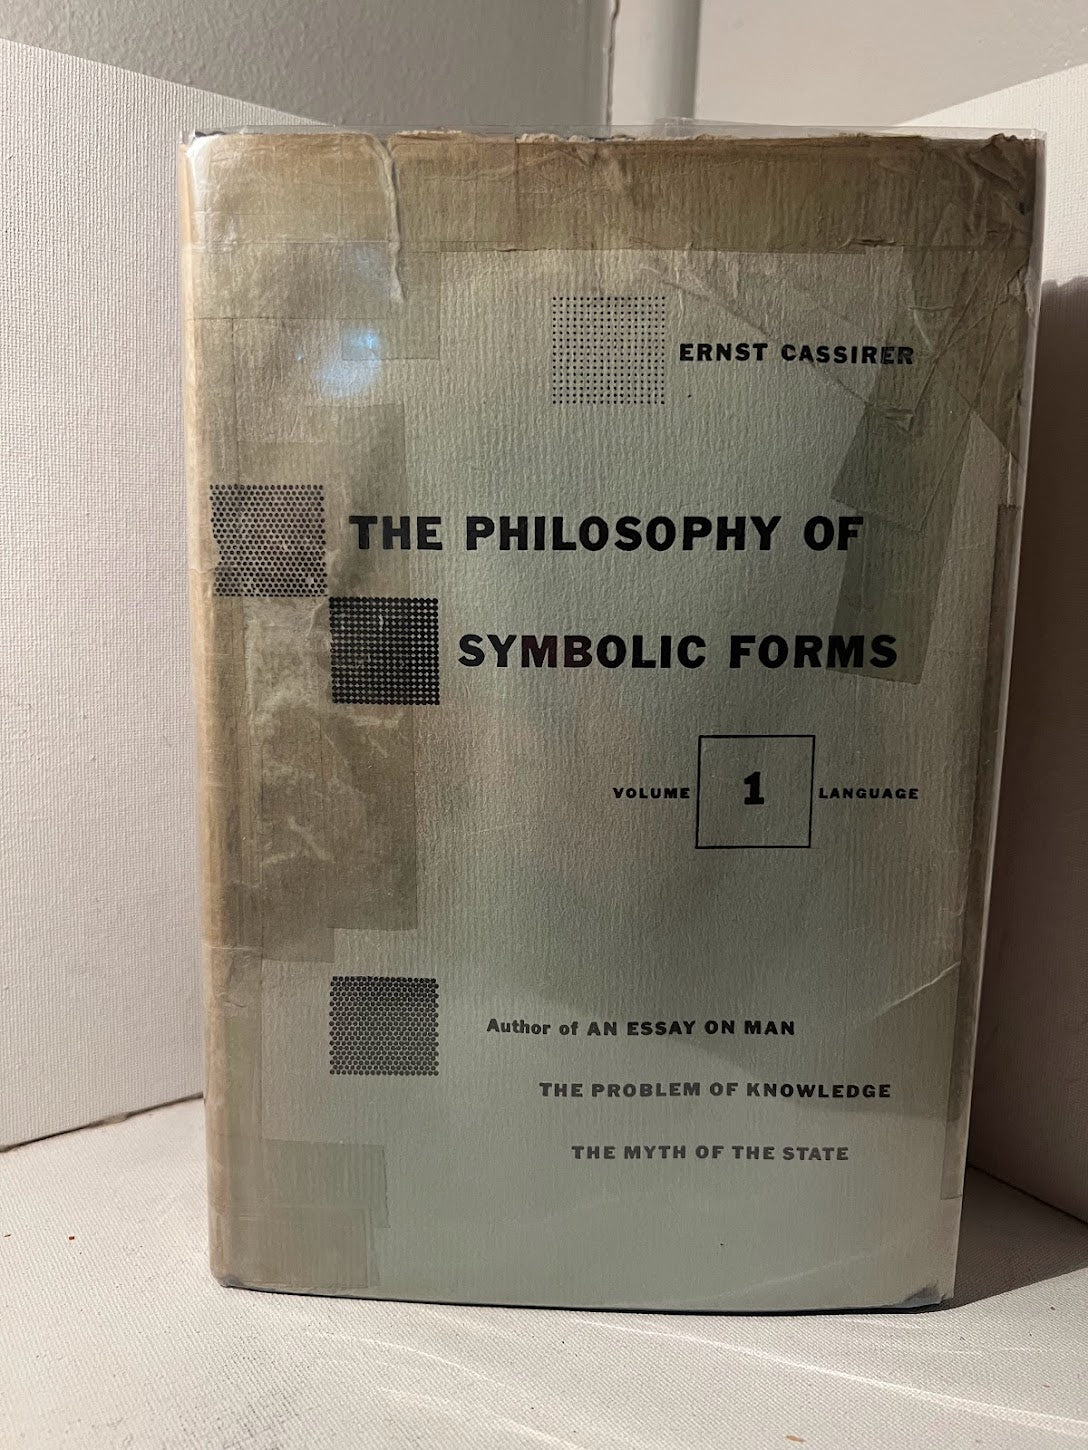 The Philosophy of Symbolic Forms by Ernst Cassirer